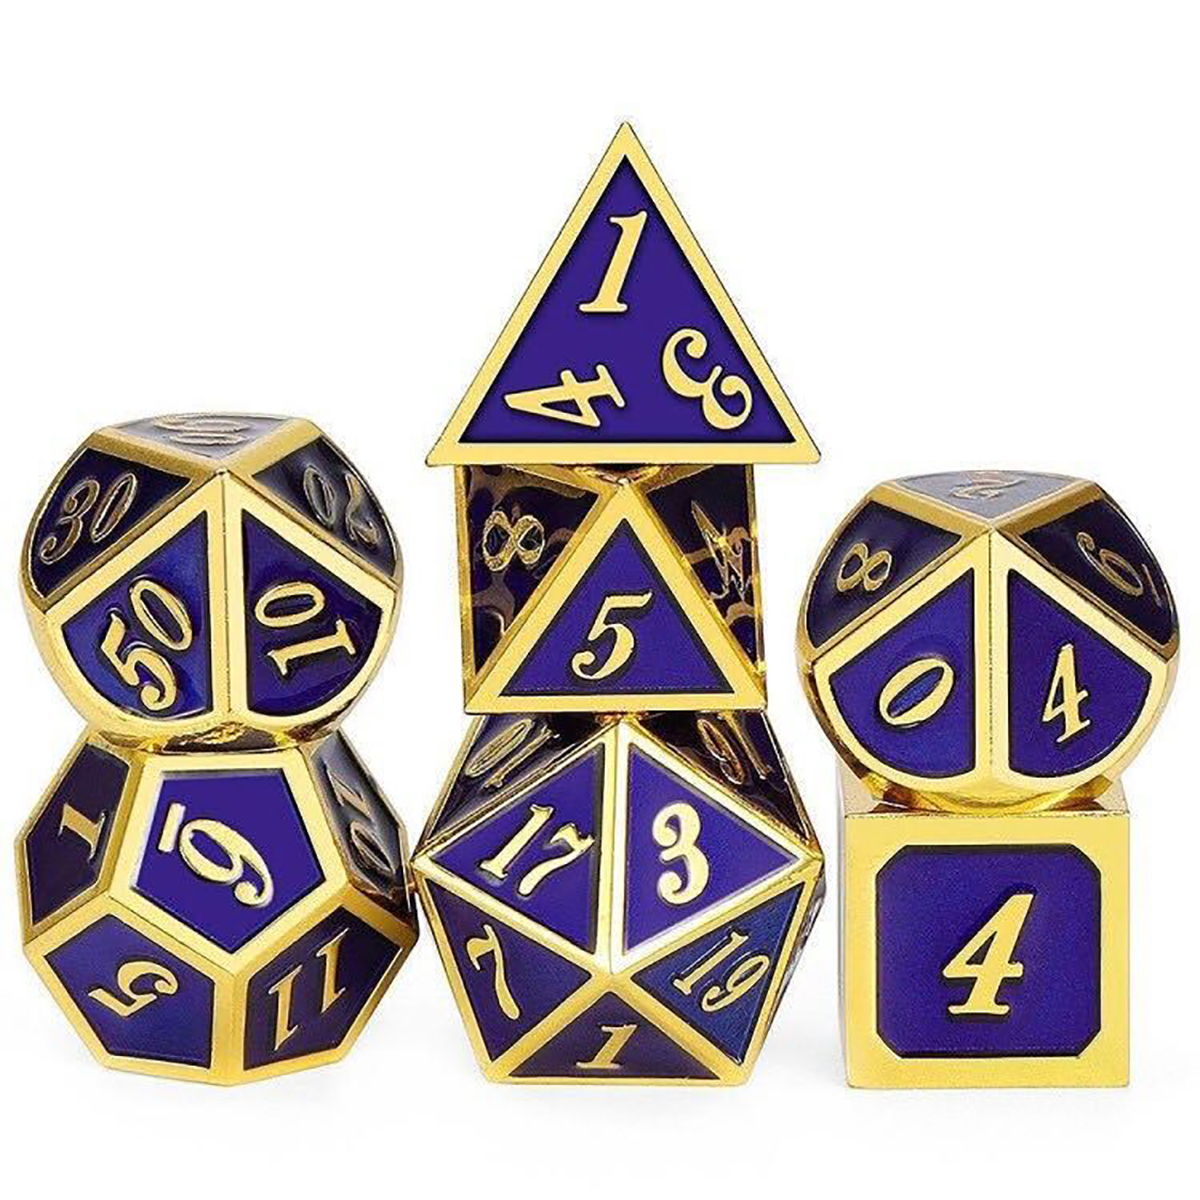 7-PcsSet-Metal-Dice-Set-Role-Playing-Dragons-Table-Board-Game-Toys-With-Cloth-Bag-Bar-Party-Game-Dic-1672532-4